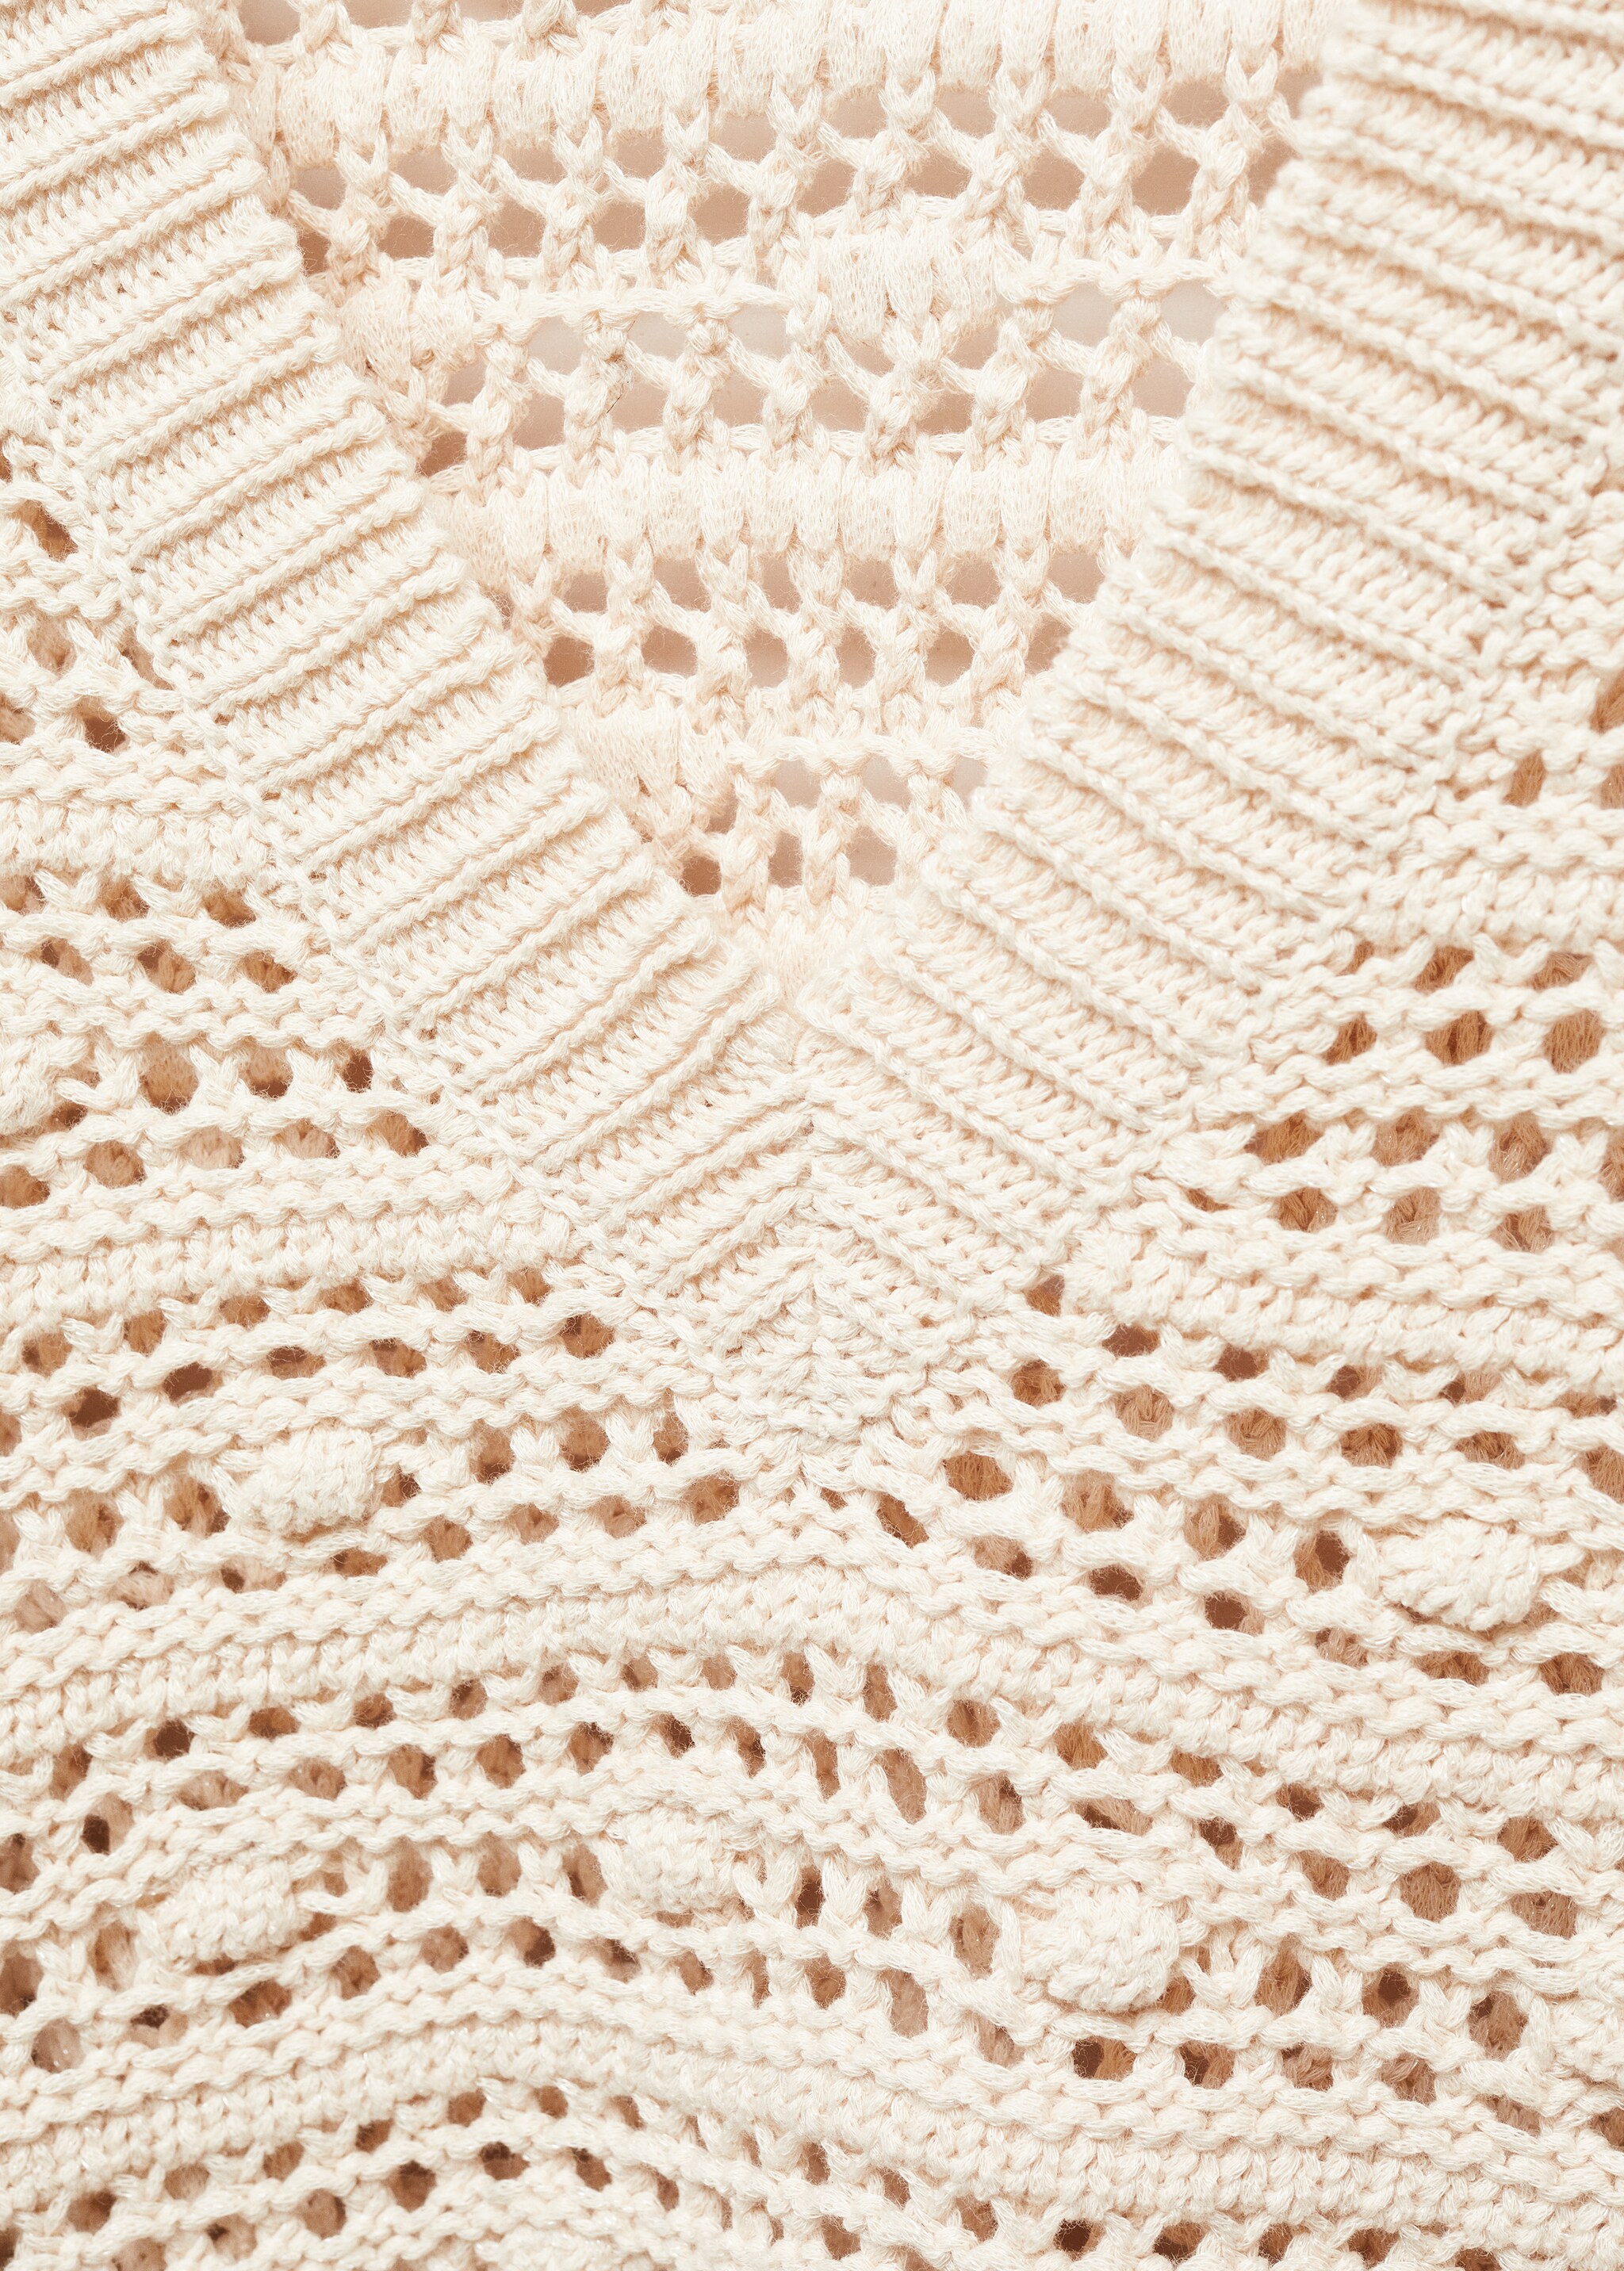 V-neck openwork knitted sweater - Details of the article 8